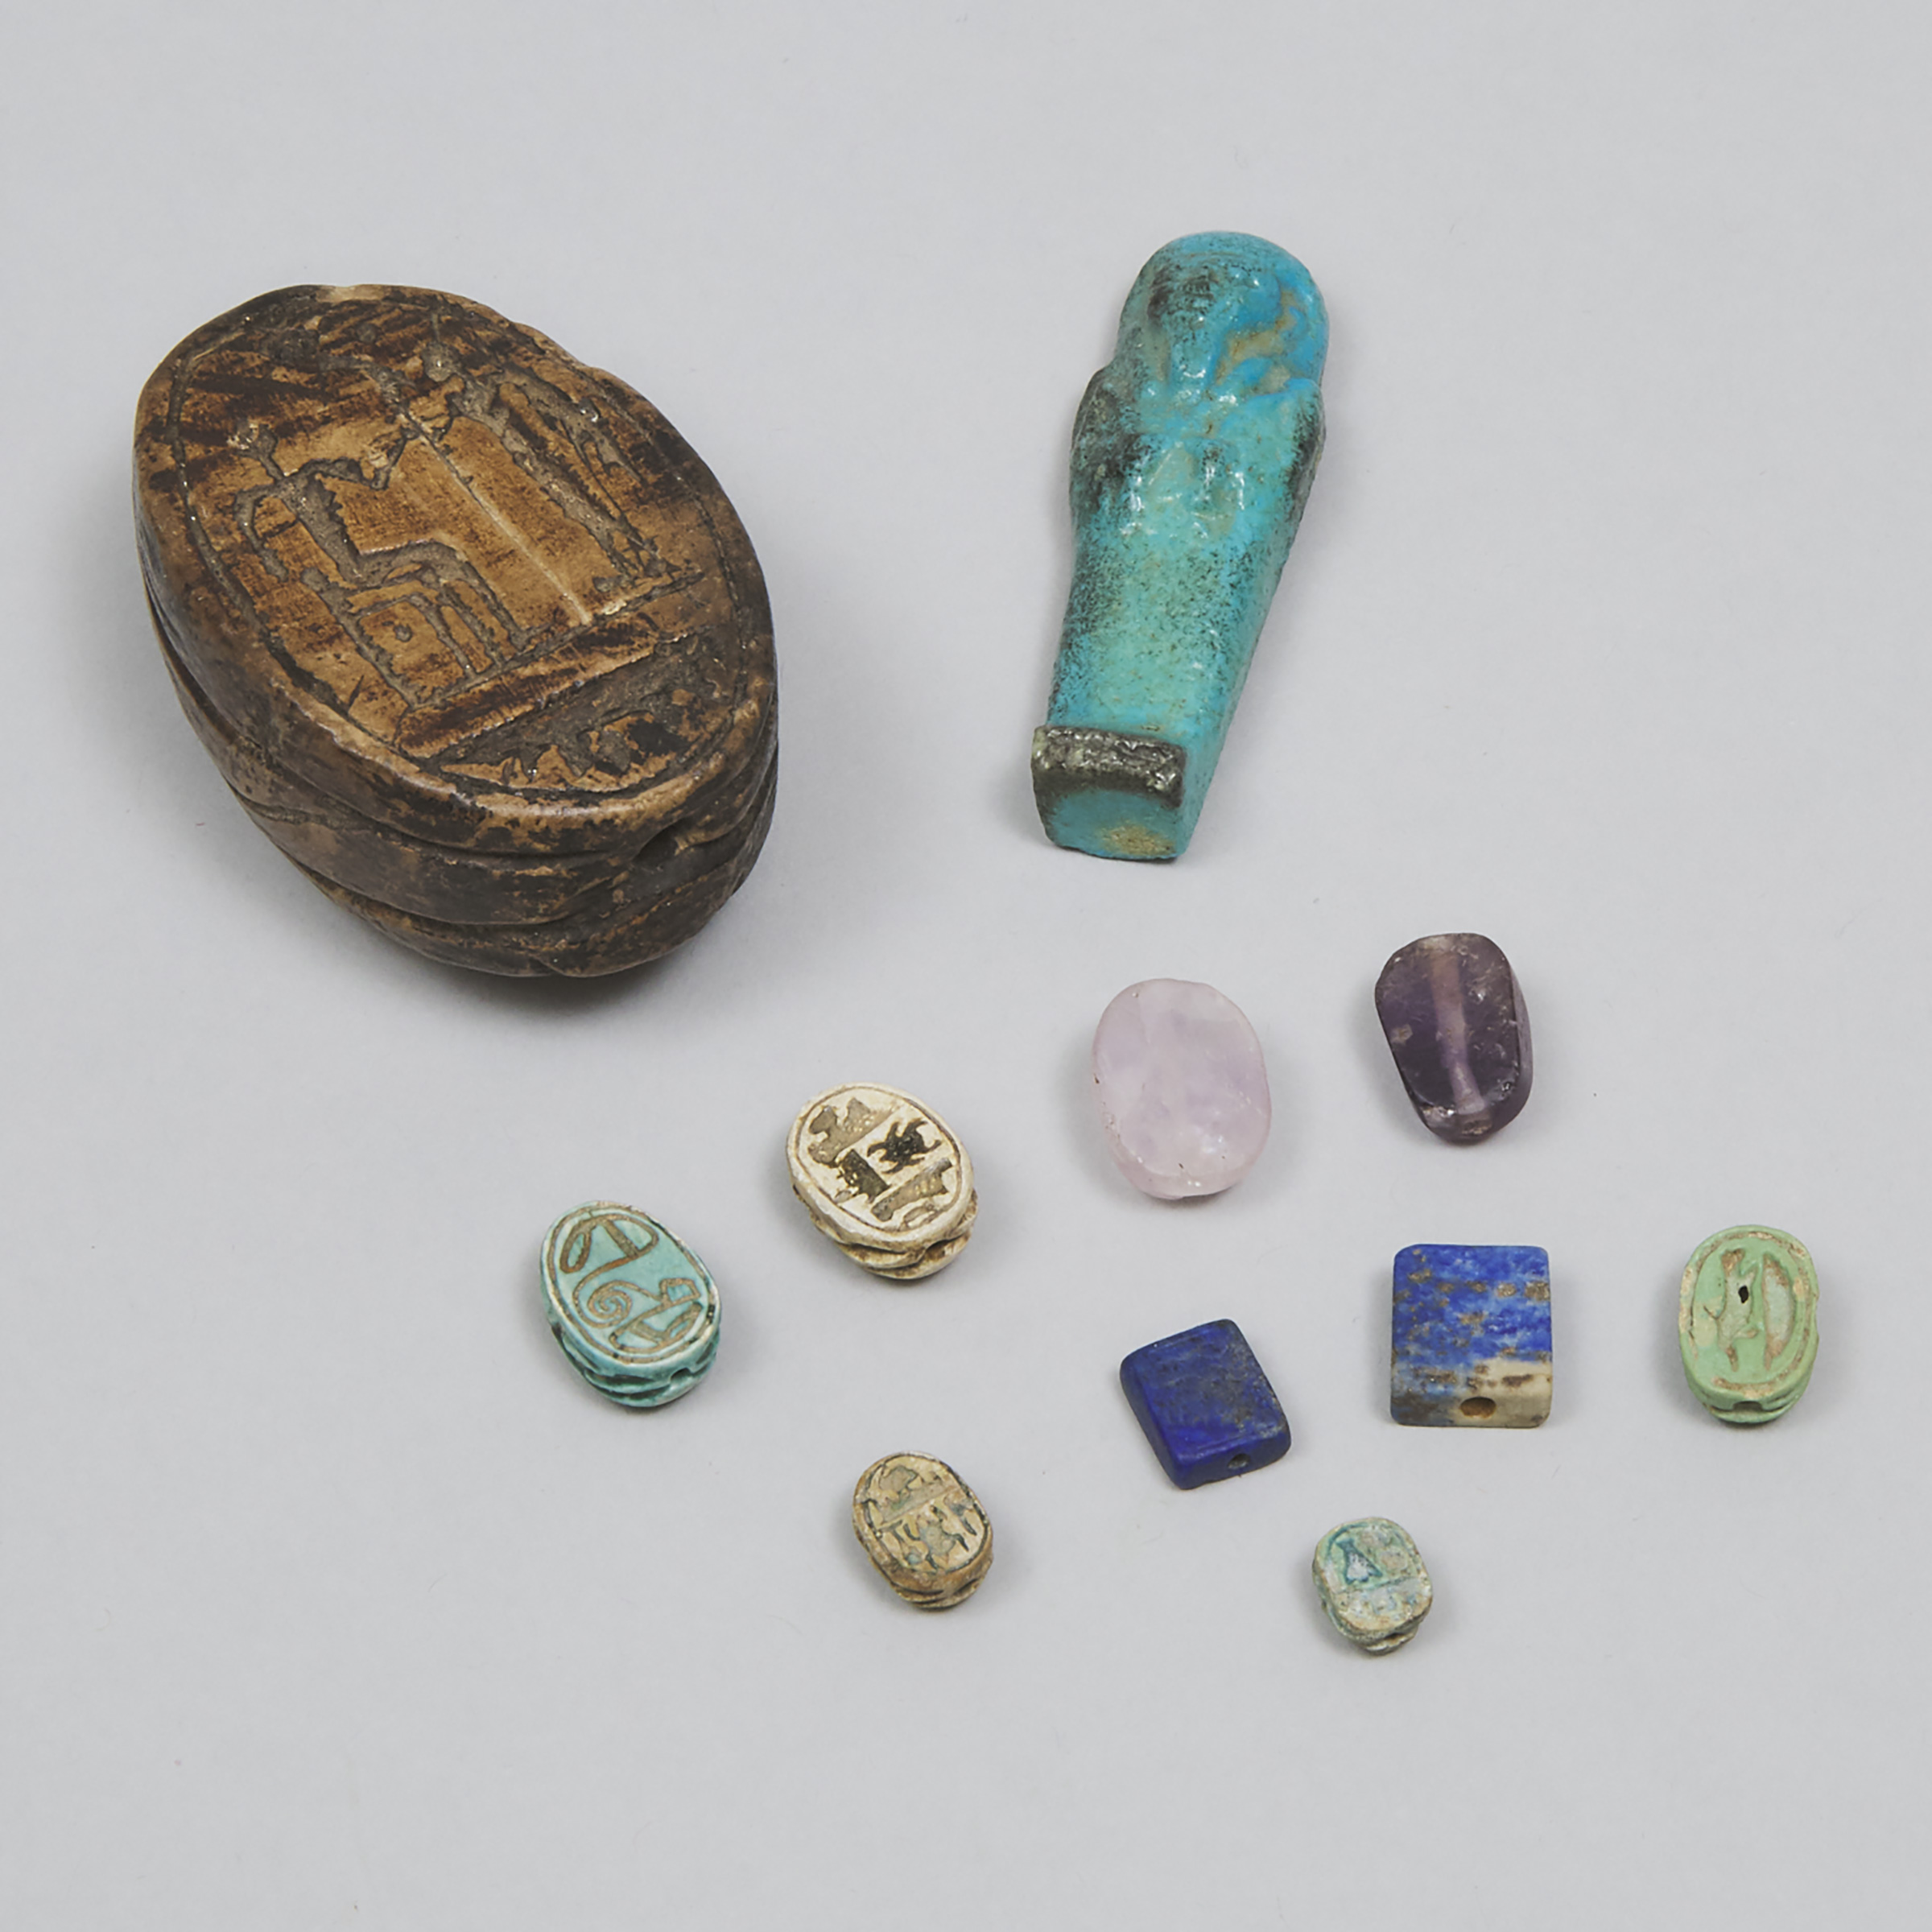 Group of Eight Egyptian Faience and Mineral Scarabs and an Ushabti, Third Intermediate Period and Later